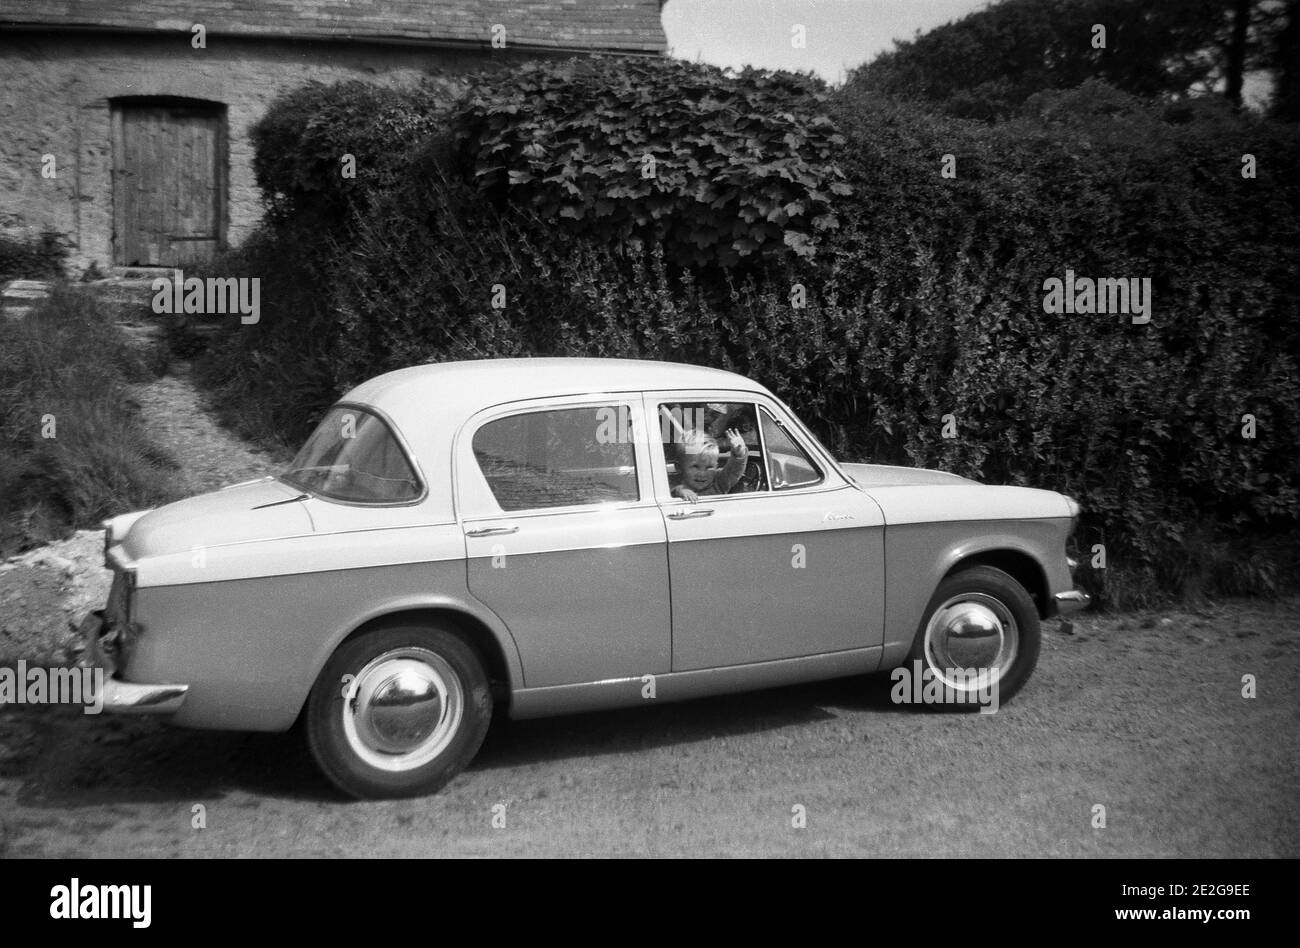 1950s, historical, on a rural lane, a little boy sitting in the driver's seat of a family car, a Hillman Minx, waving, England, UK. Founded in 1907, the Hillman Motor car company was based near Coventry and the Hillman Minx was in production from 1931 to 1970, with many different versions. The car seen here is possibly the Minx series V. Hillman, originally a bicycle maker, was taken over by the Rootes Brothers in 1928. Stock Photo